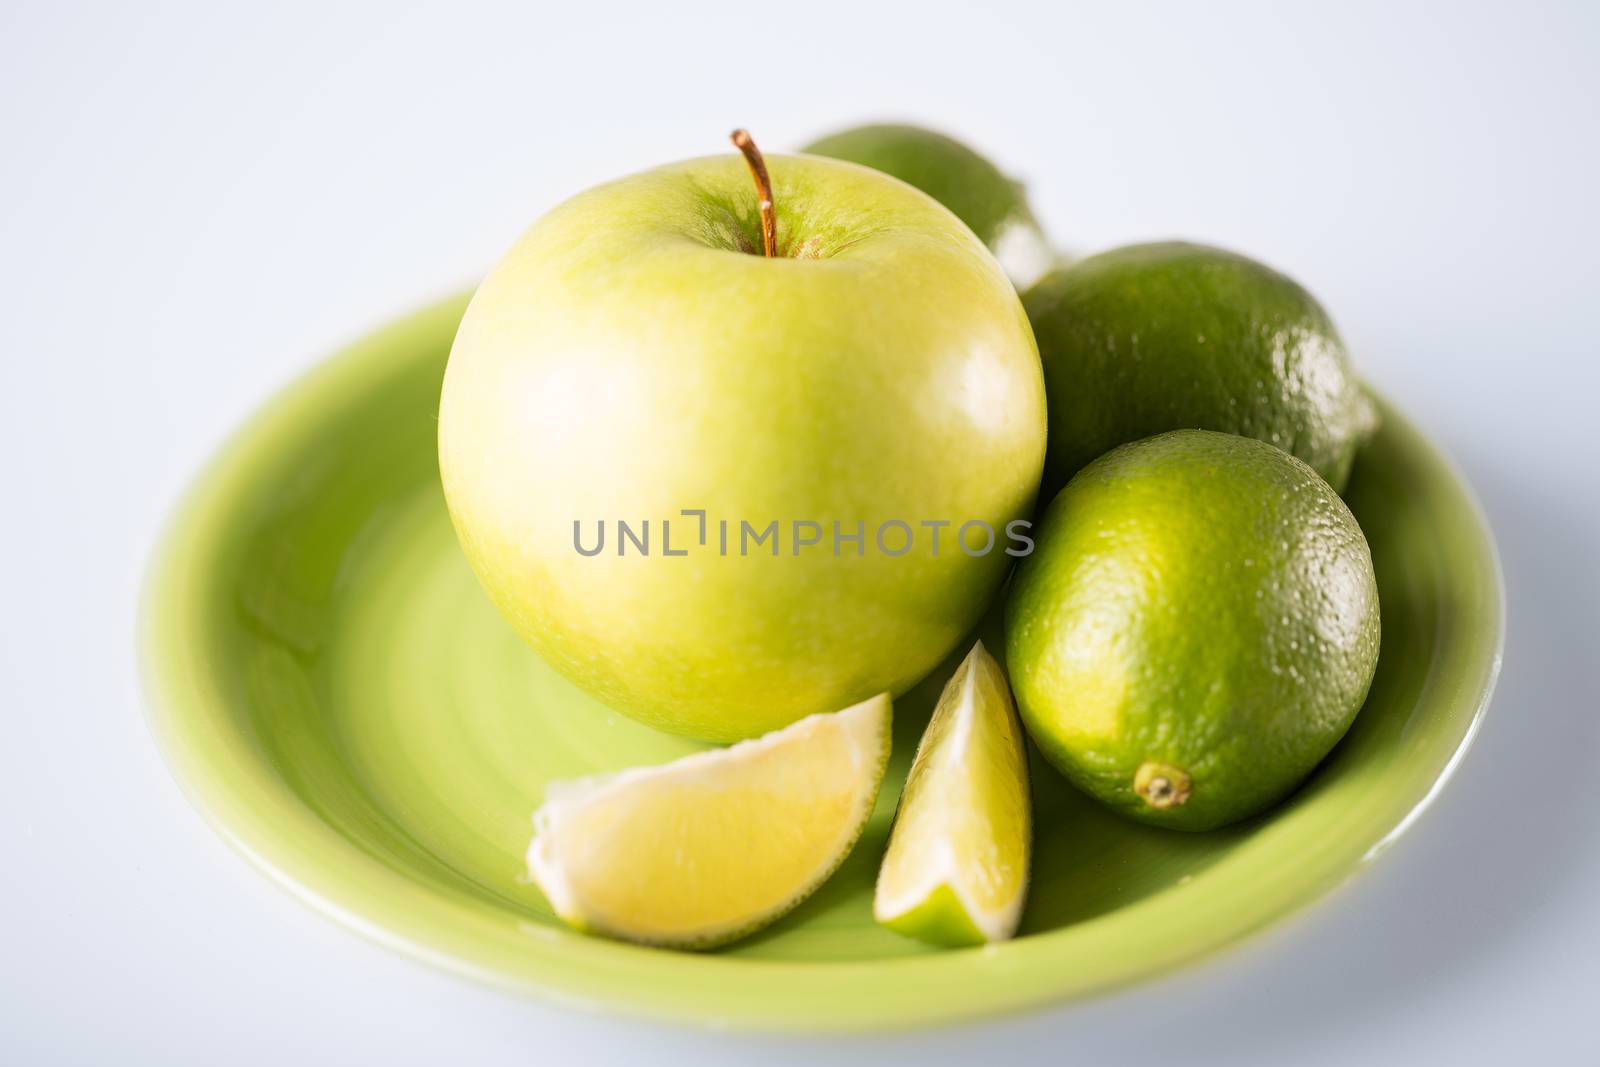 healthy food and cooking concept - green apple with limes in green bowl